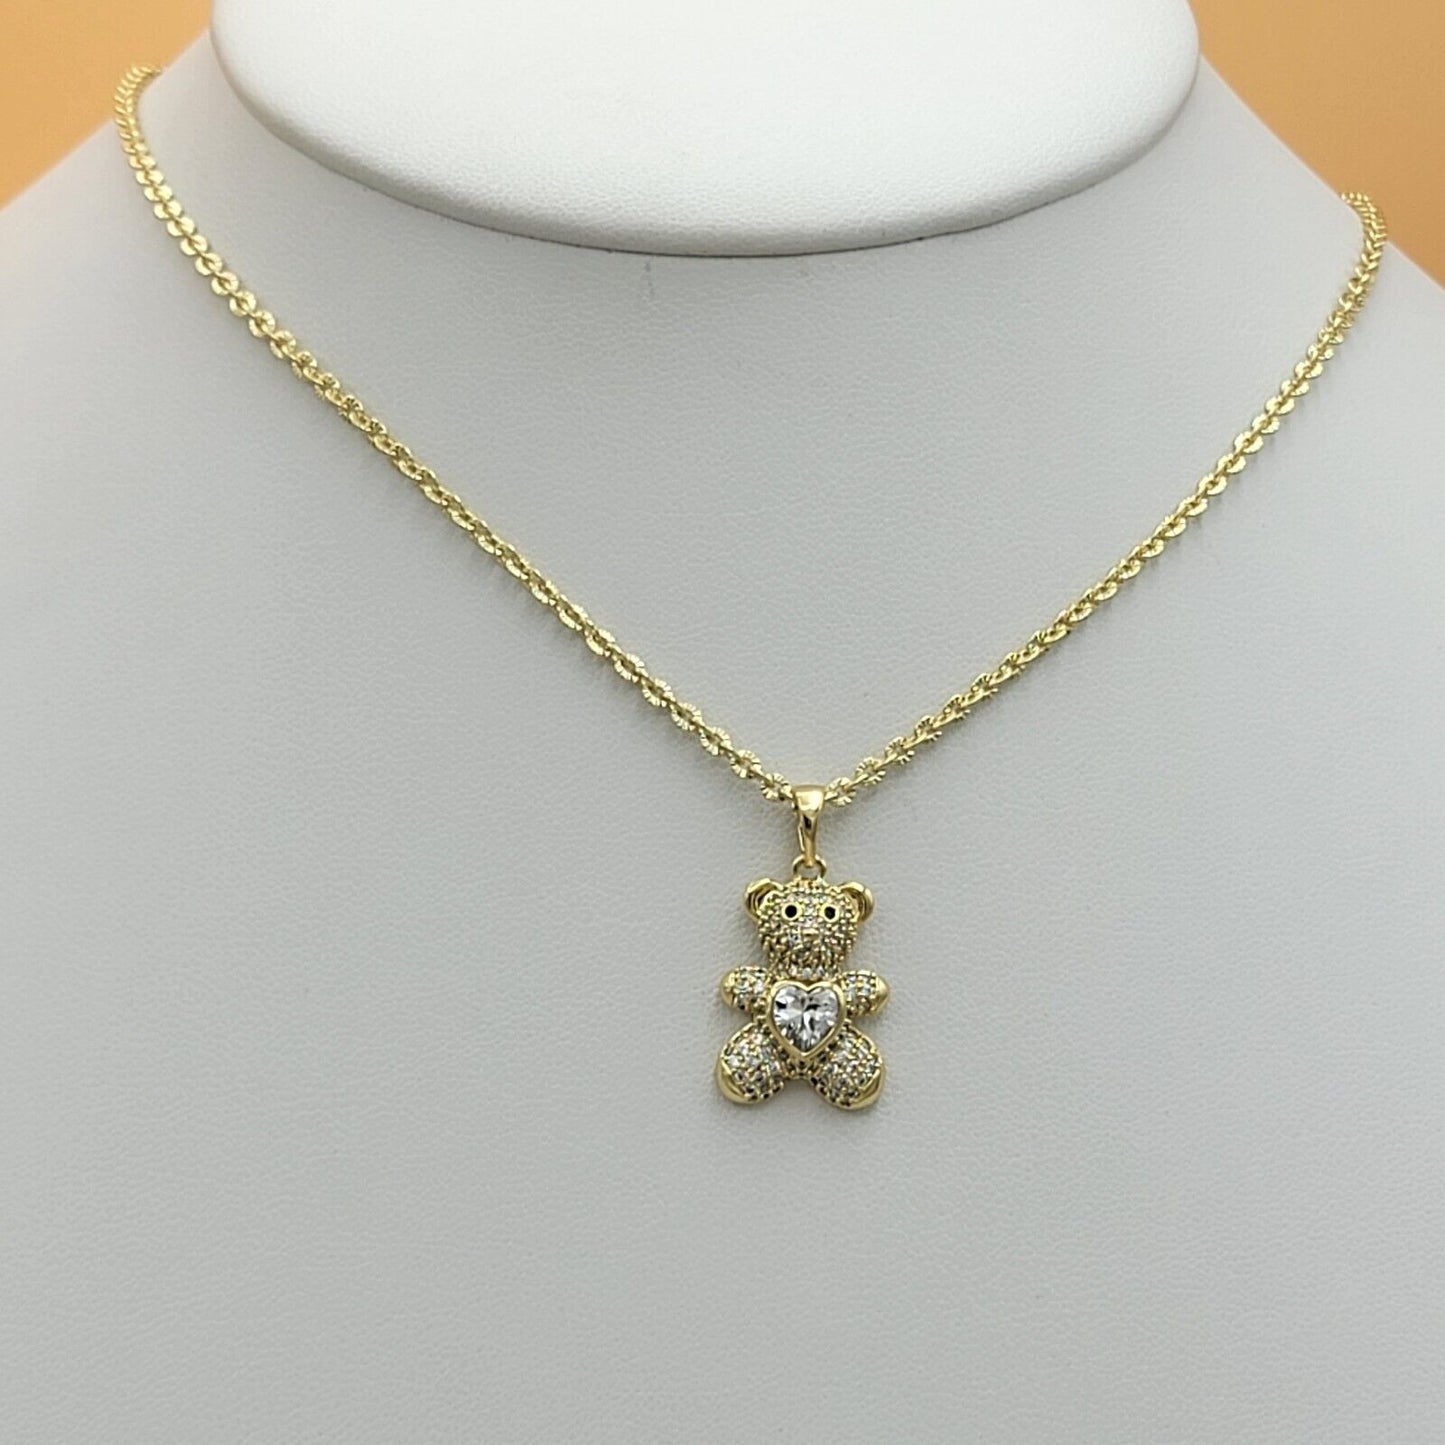 Necklaces - 14K Gold Plated. Icy Crystal Bear Pendant & Chain.